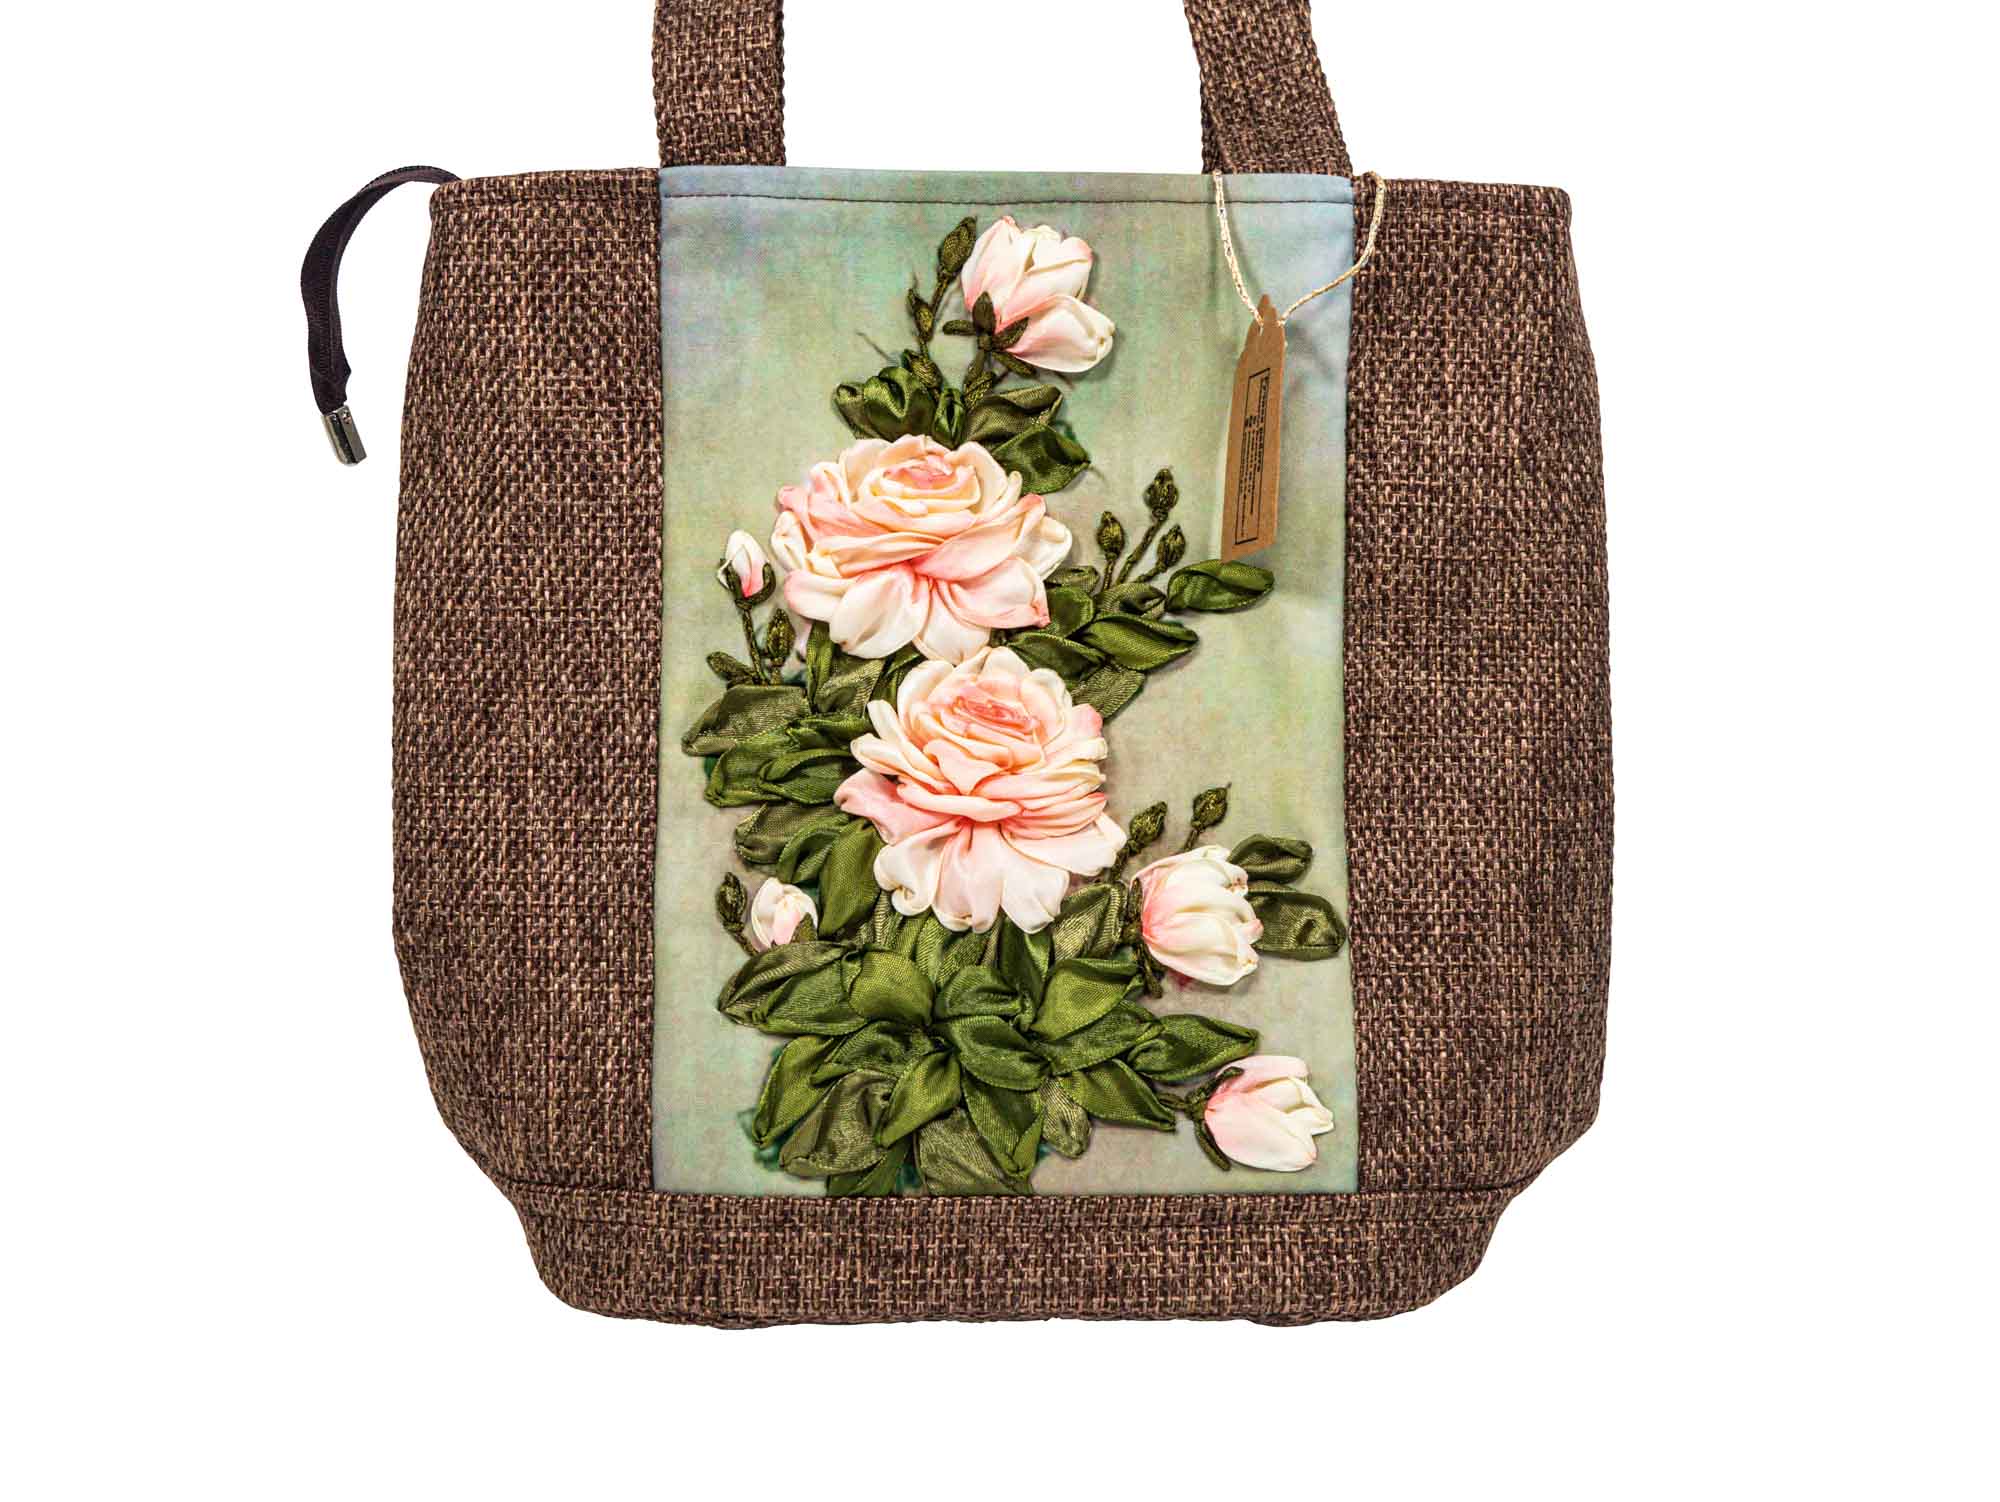 Hand Embroidered Burlap Tote Bag: Gallery Item - 1379-30-G4969 (9UL8)